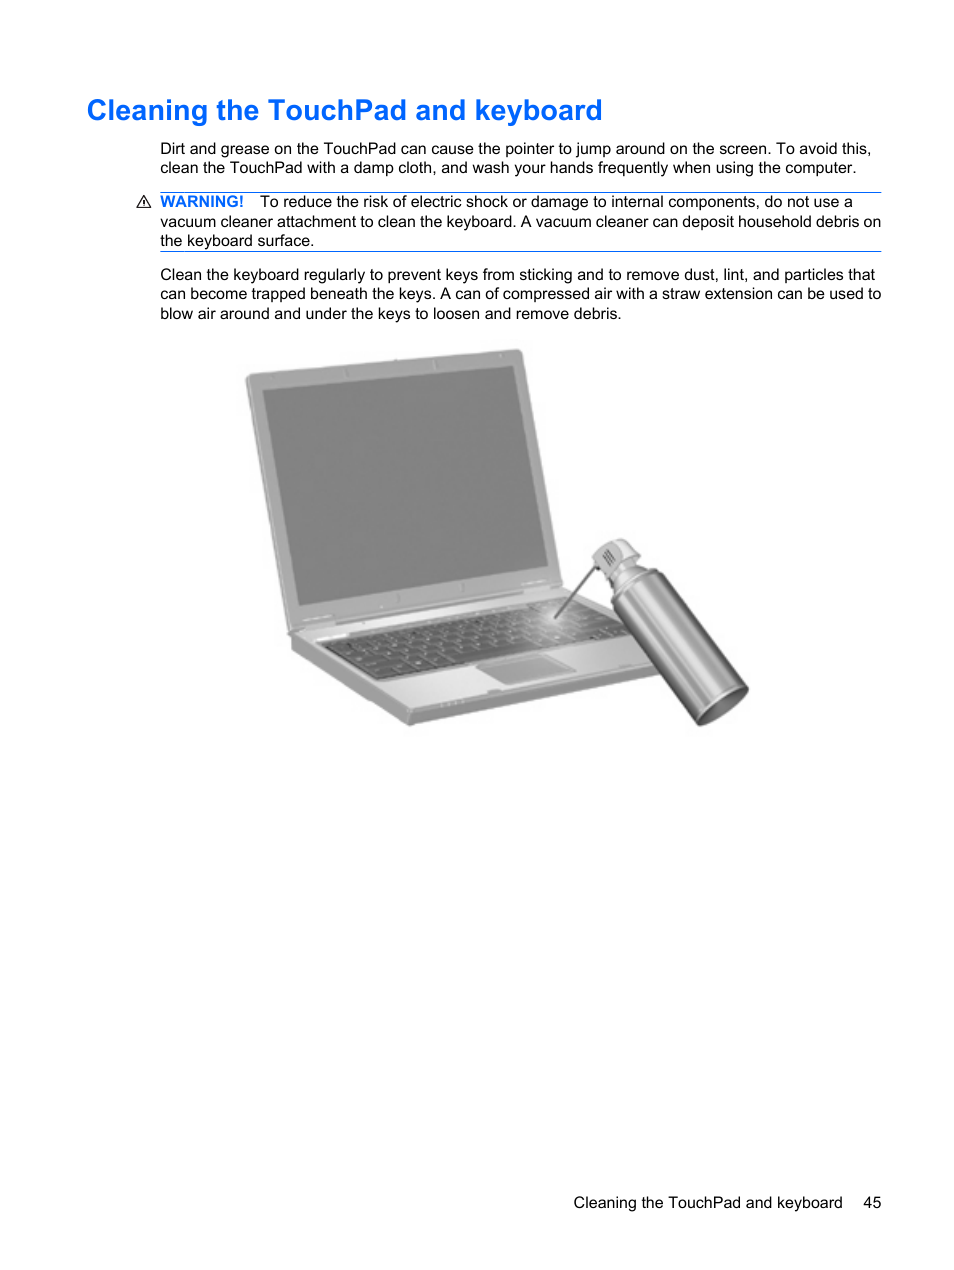 Cleaning the touchpad and keyboard | HP EliteBook 8540w Mobile Workstation  User Manual | Page 57 / 187